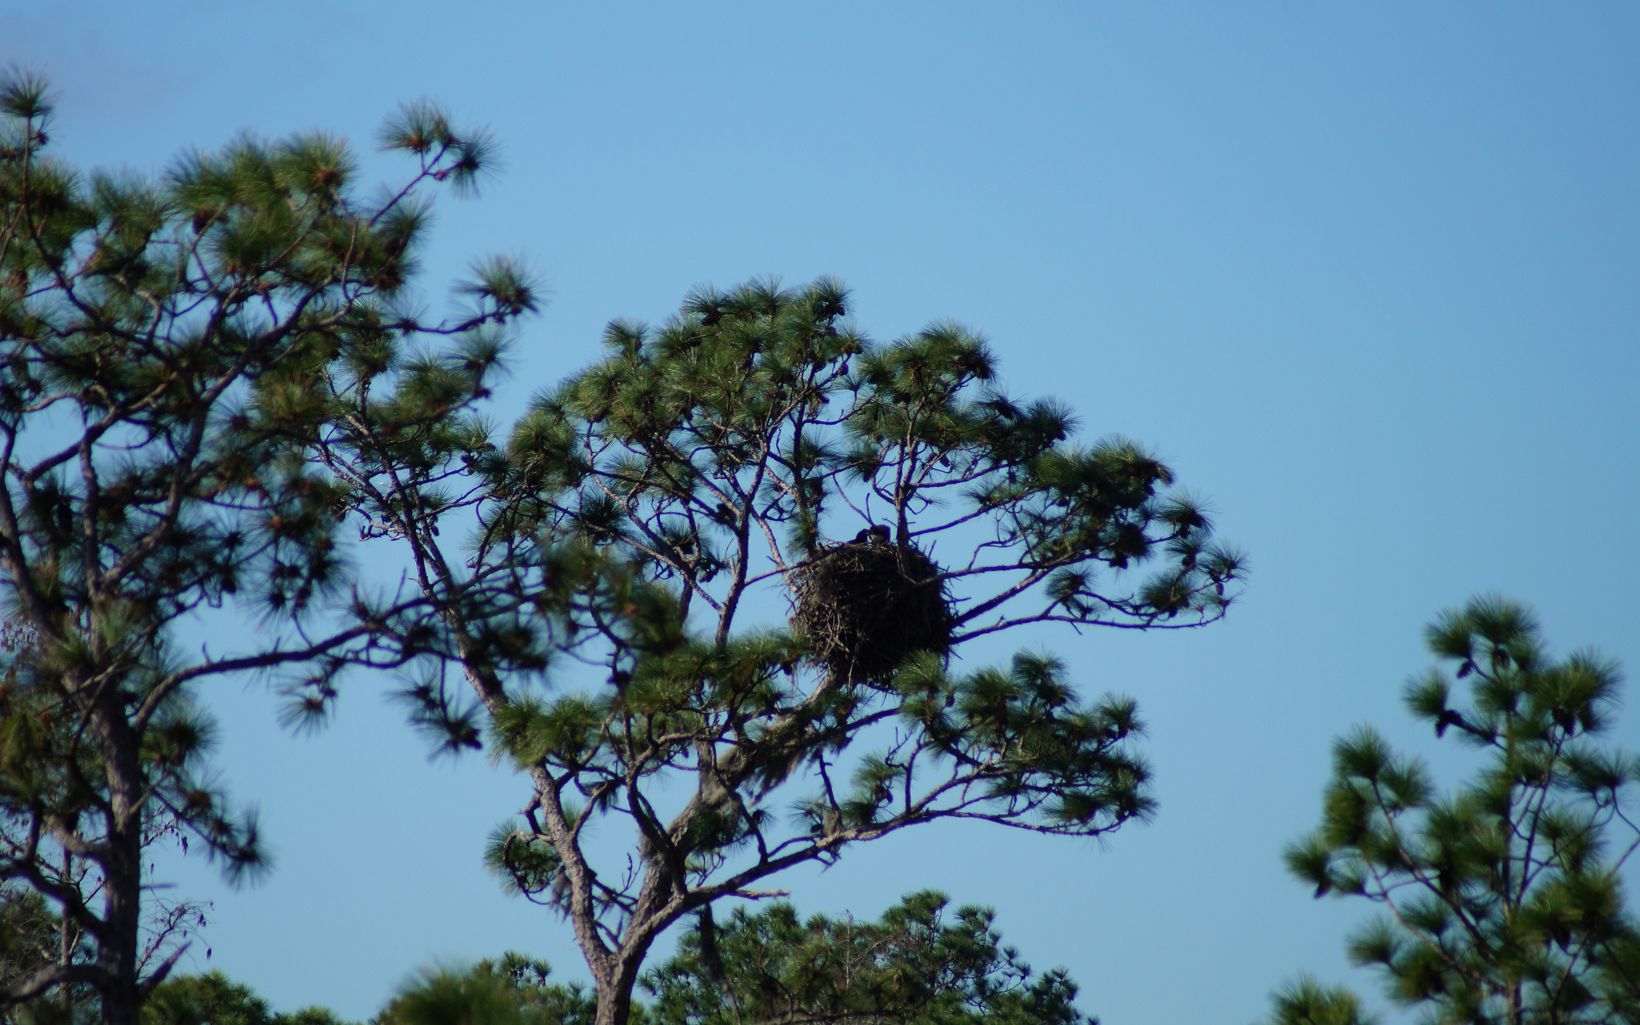 
                
                  Bald Eagle Monitoring Preserve staff routinely monitor various wildlife species on the preserves, including discovery of this bald eagle nest high in the treetops above Disney Wilderness Preserve.
                  © Hannah O'Malley/TNC
                
              